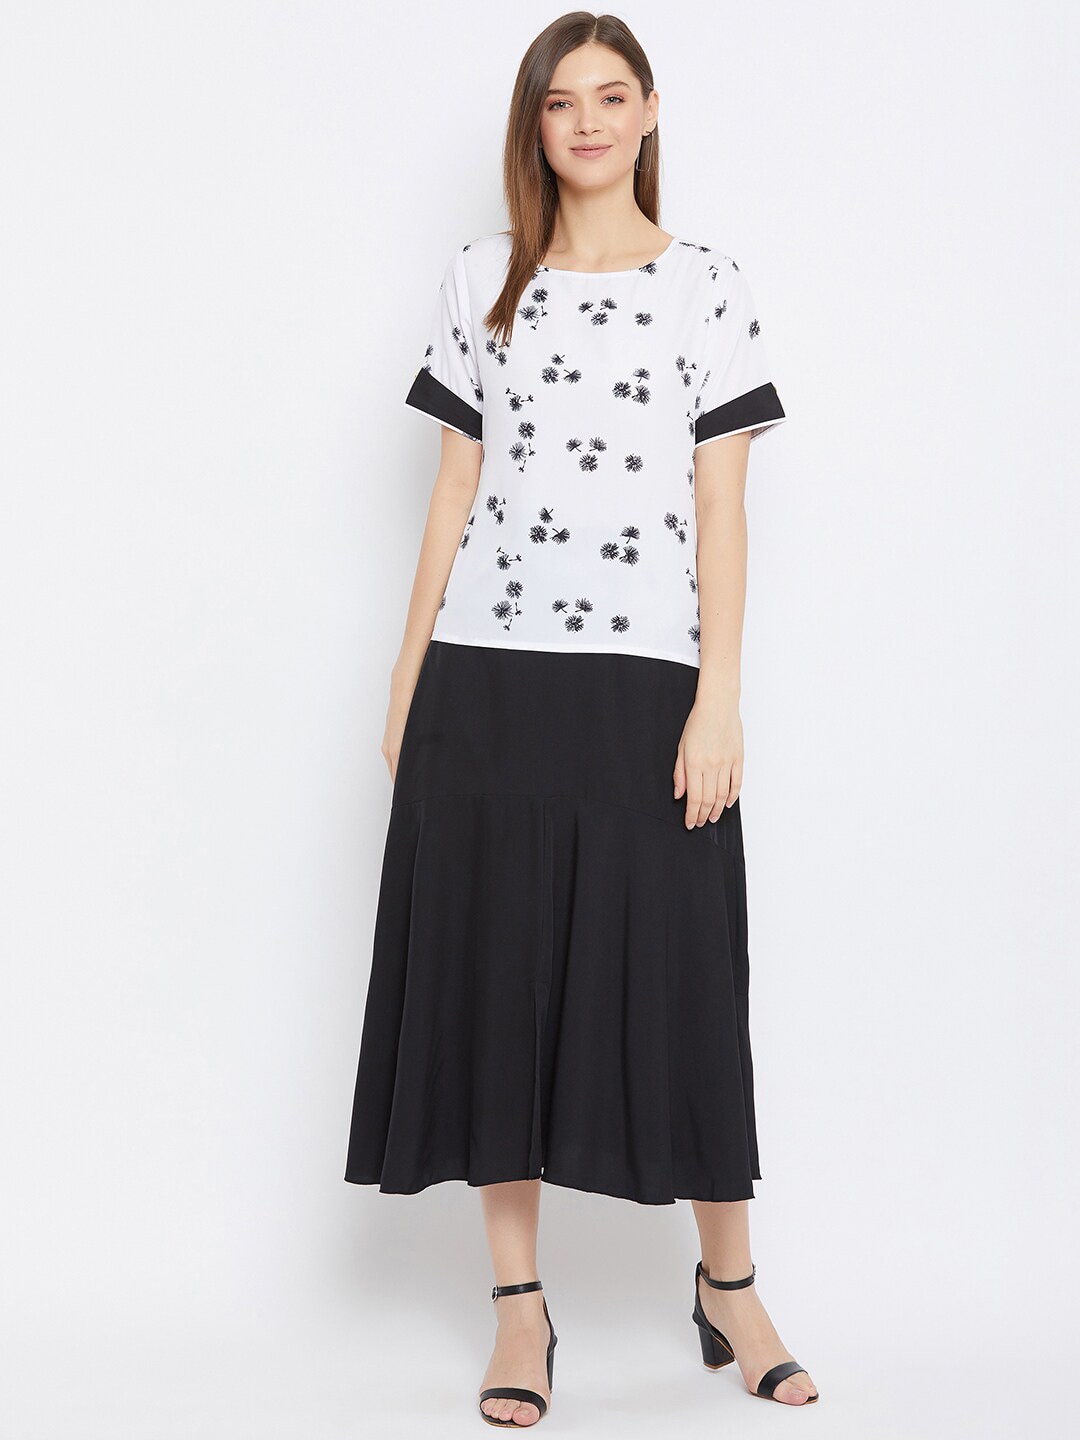 Bitterlime Women White & Black Printed Top with Skirt Price in India